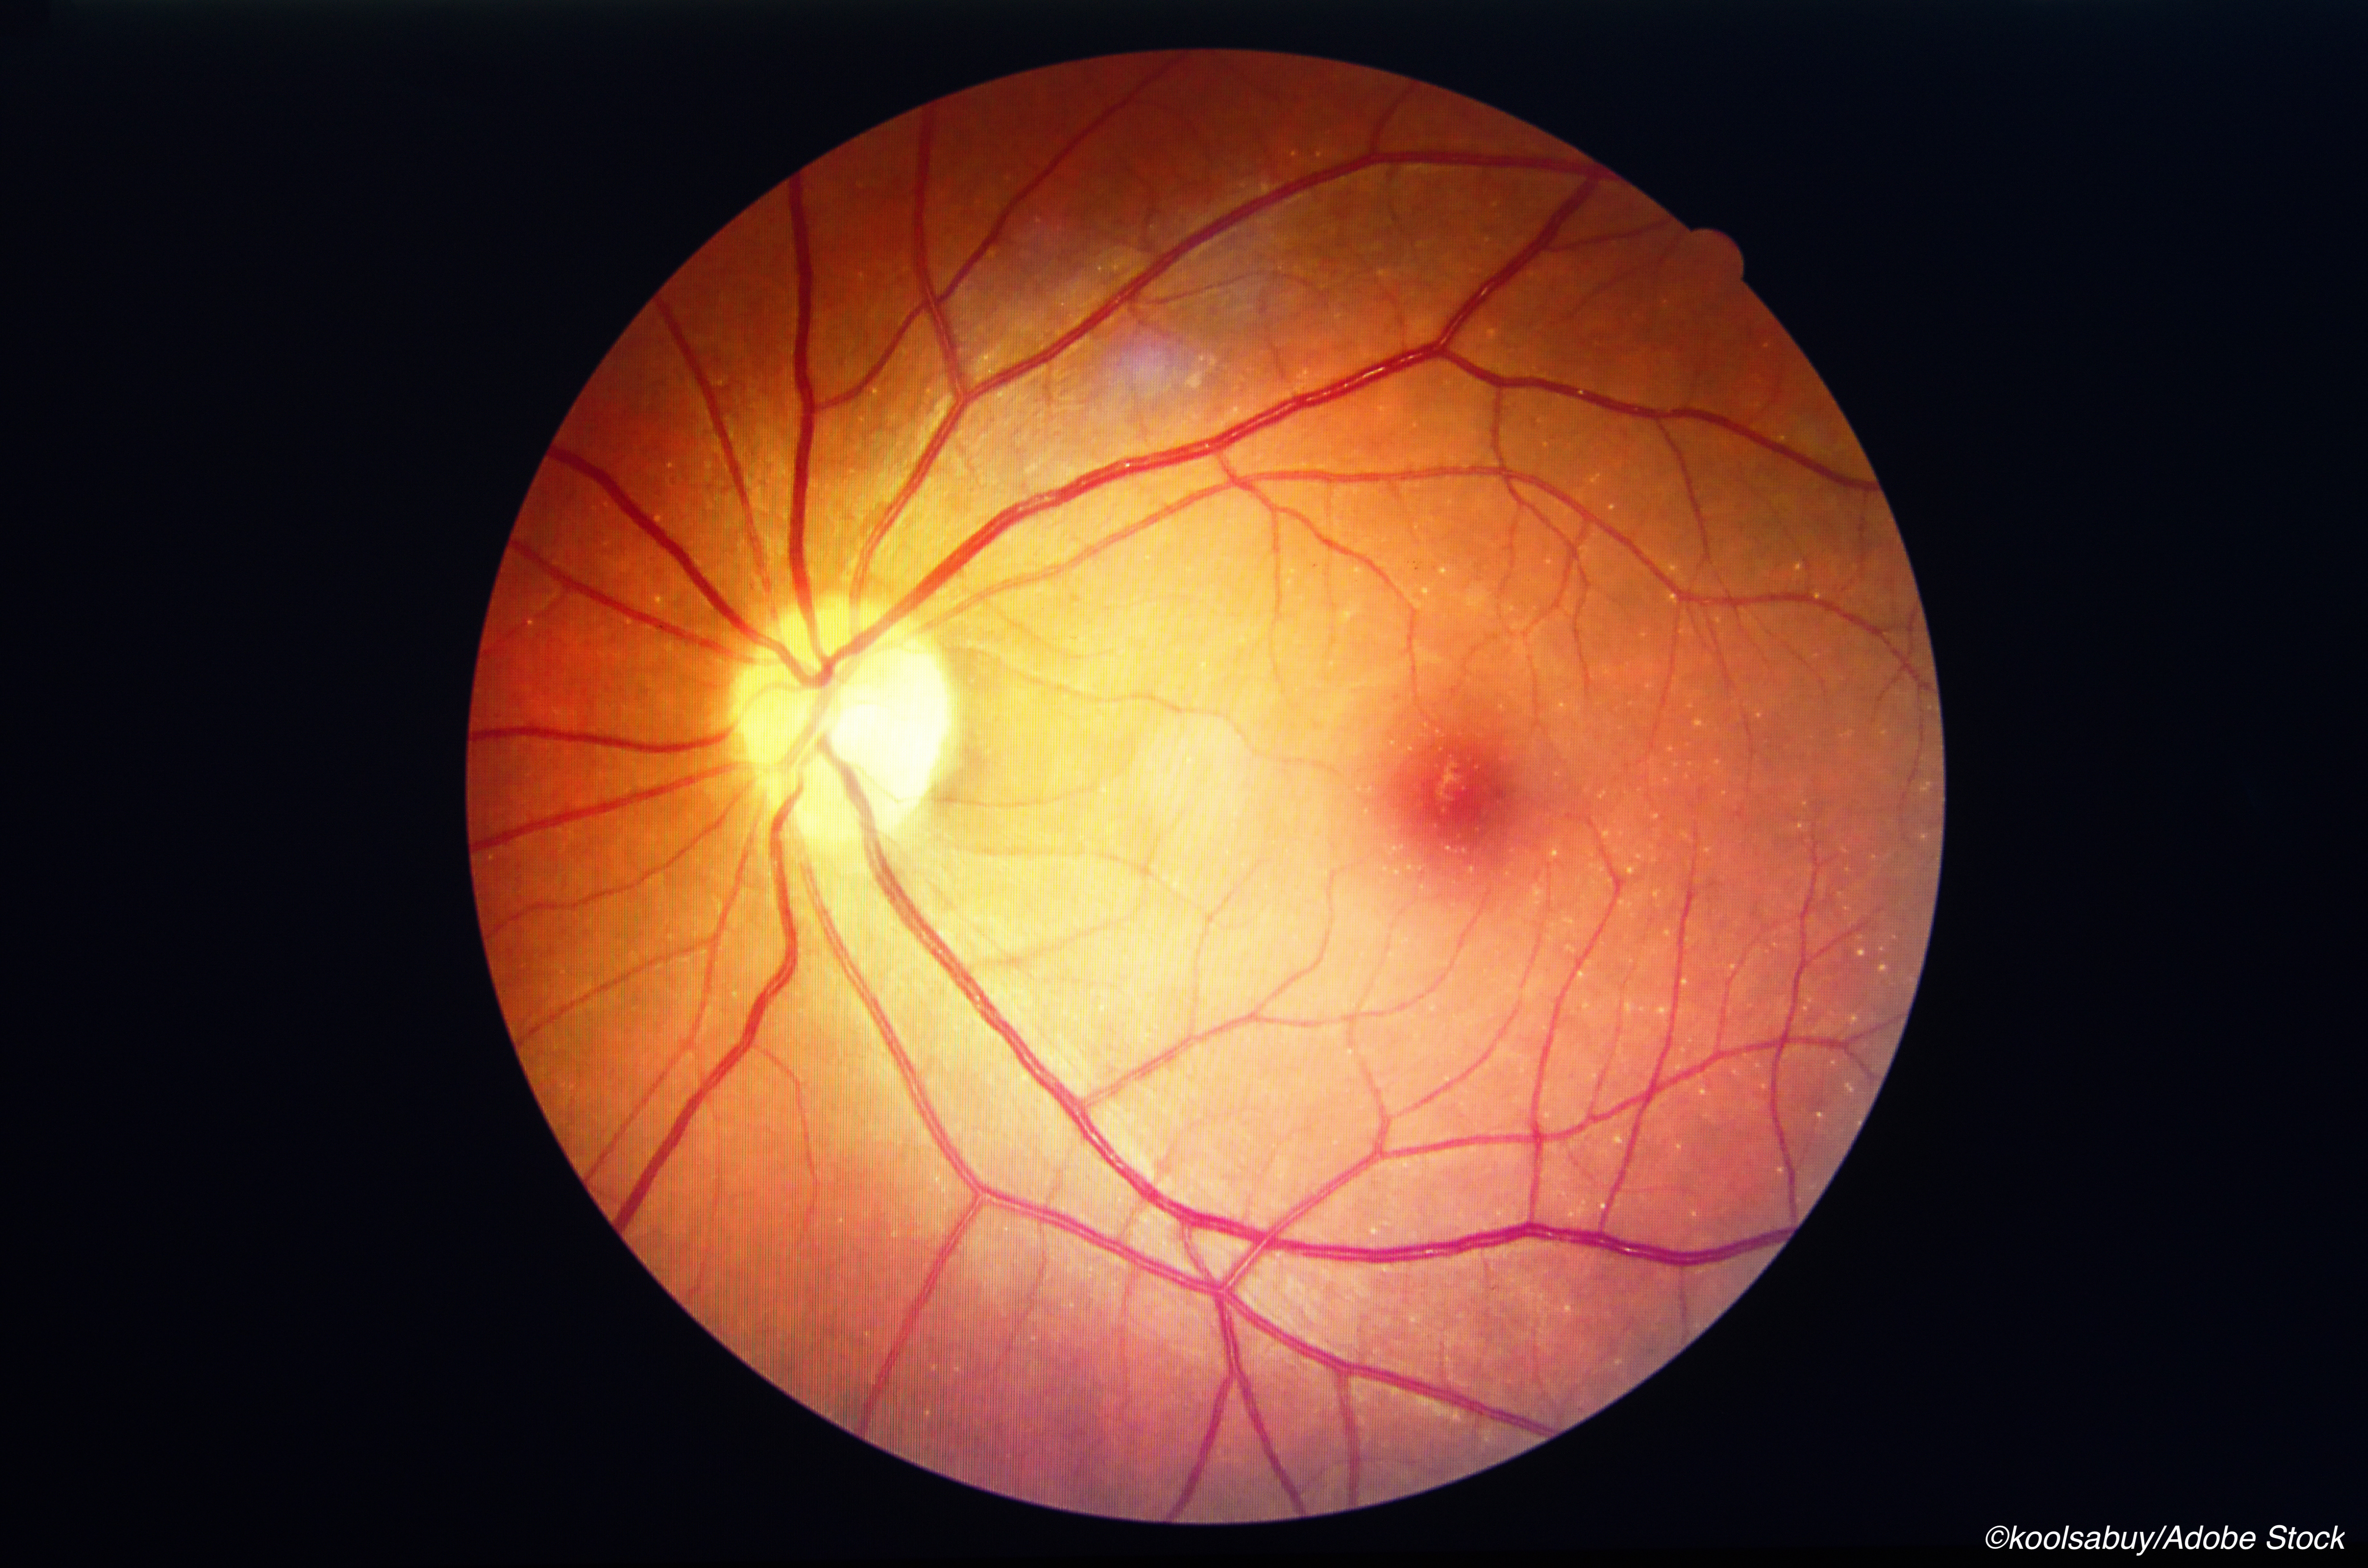 Kids with T2D Developed Retinopathy Faster, More Often Than Kids with T1D